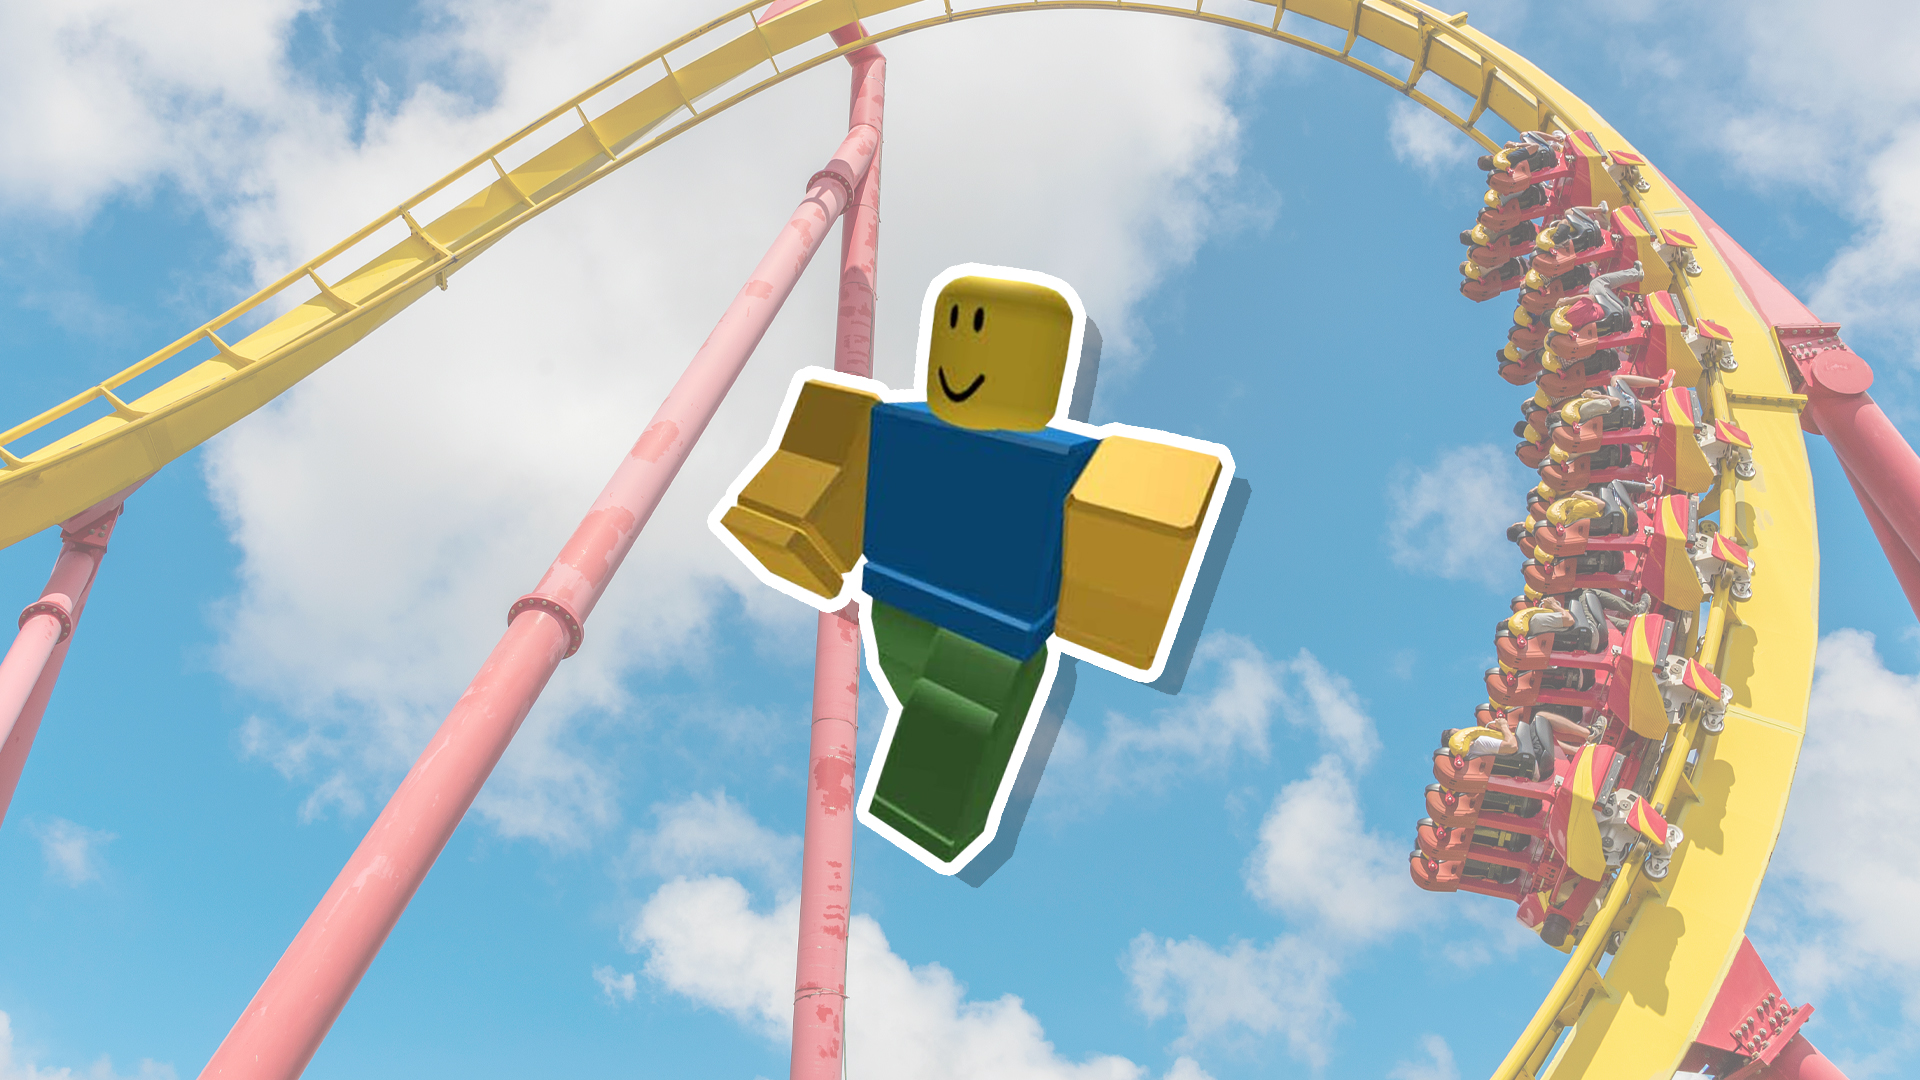 A Roblox character next to a rollercoaster